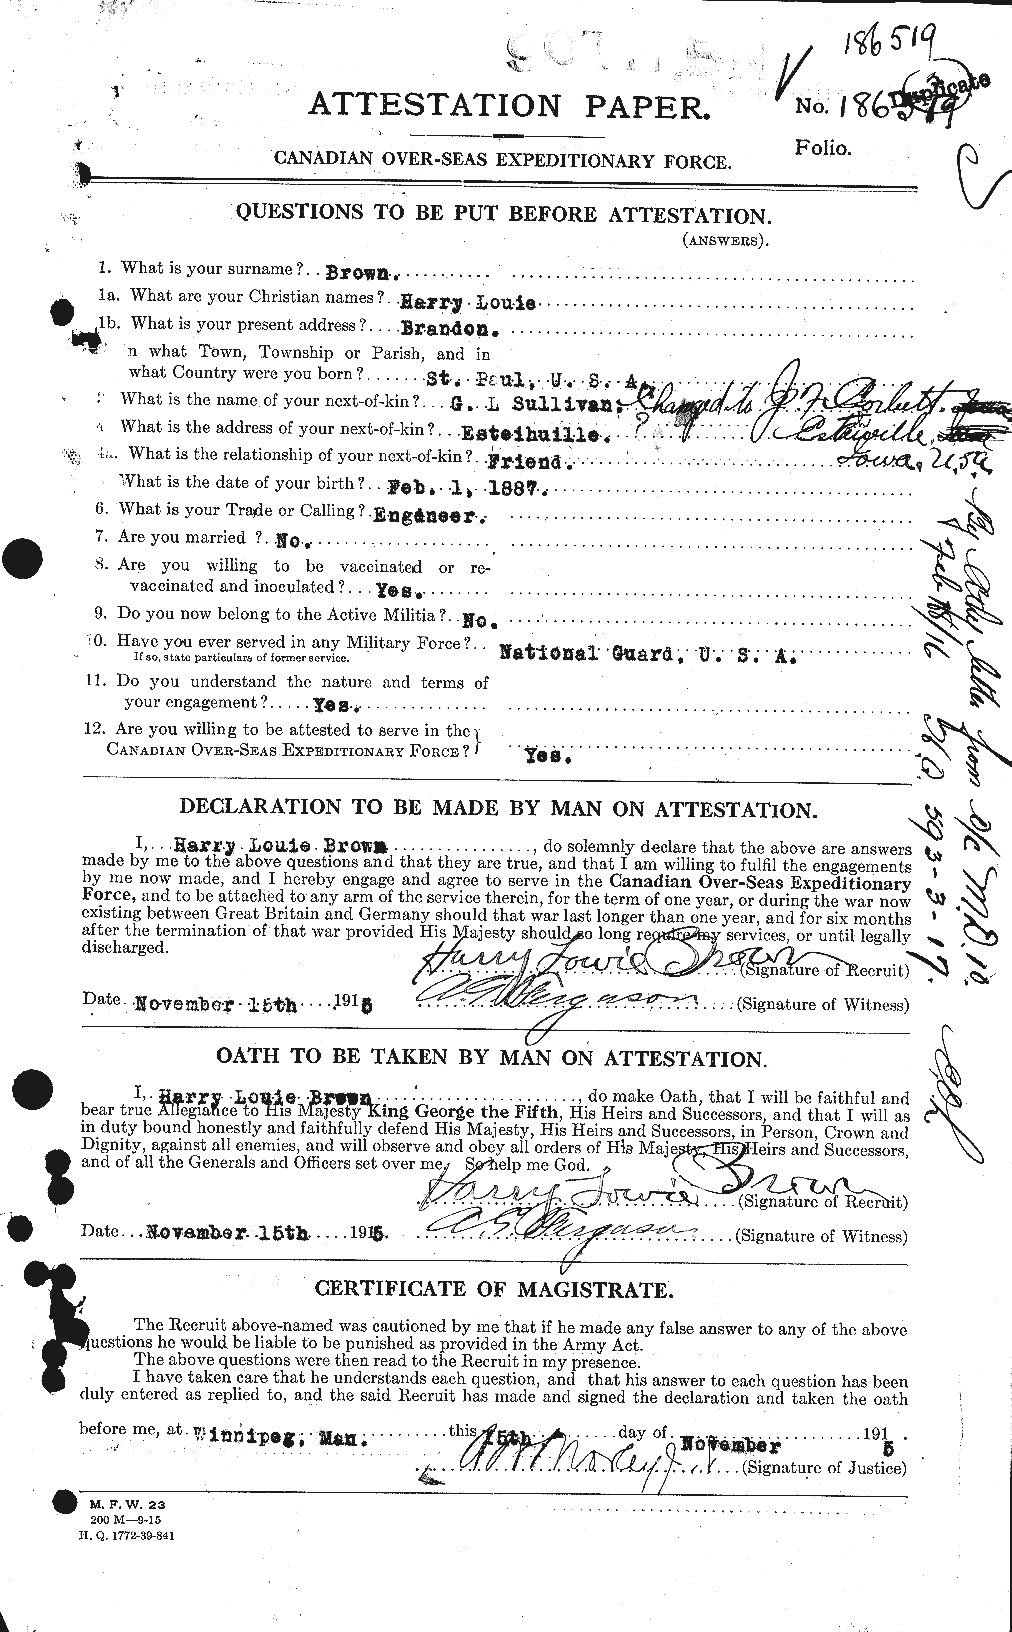 Personnel Records of the First World War - CEF 265459a